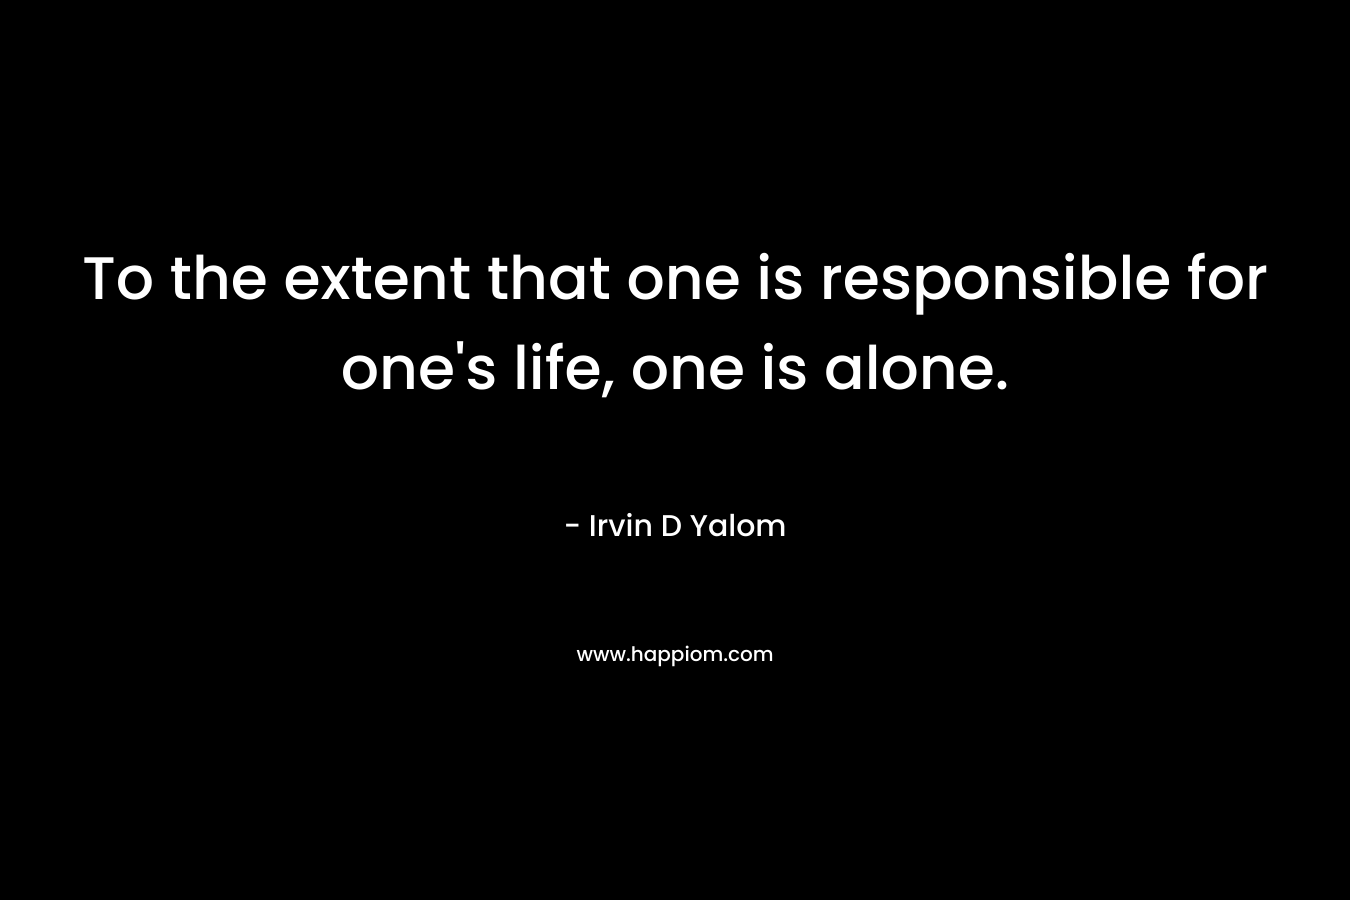 To the extent that one is responsible for one's life, one is alone.